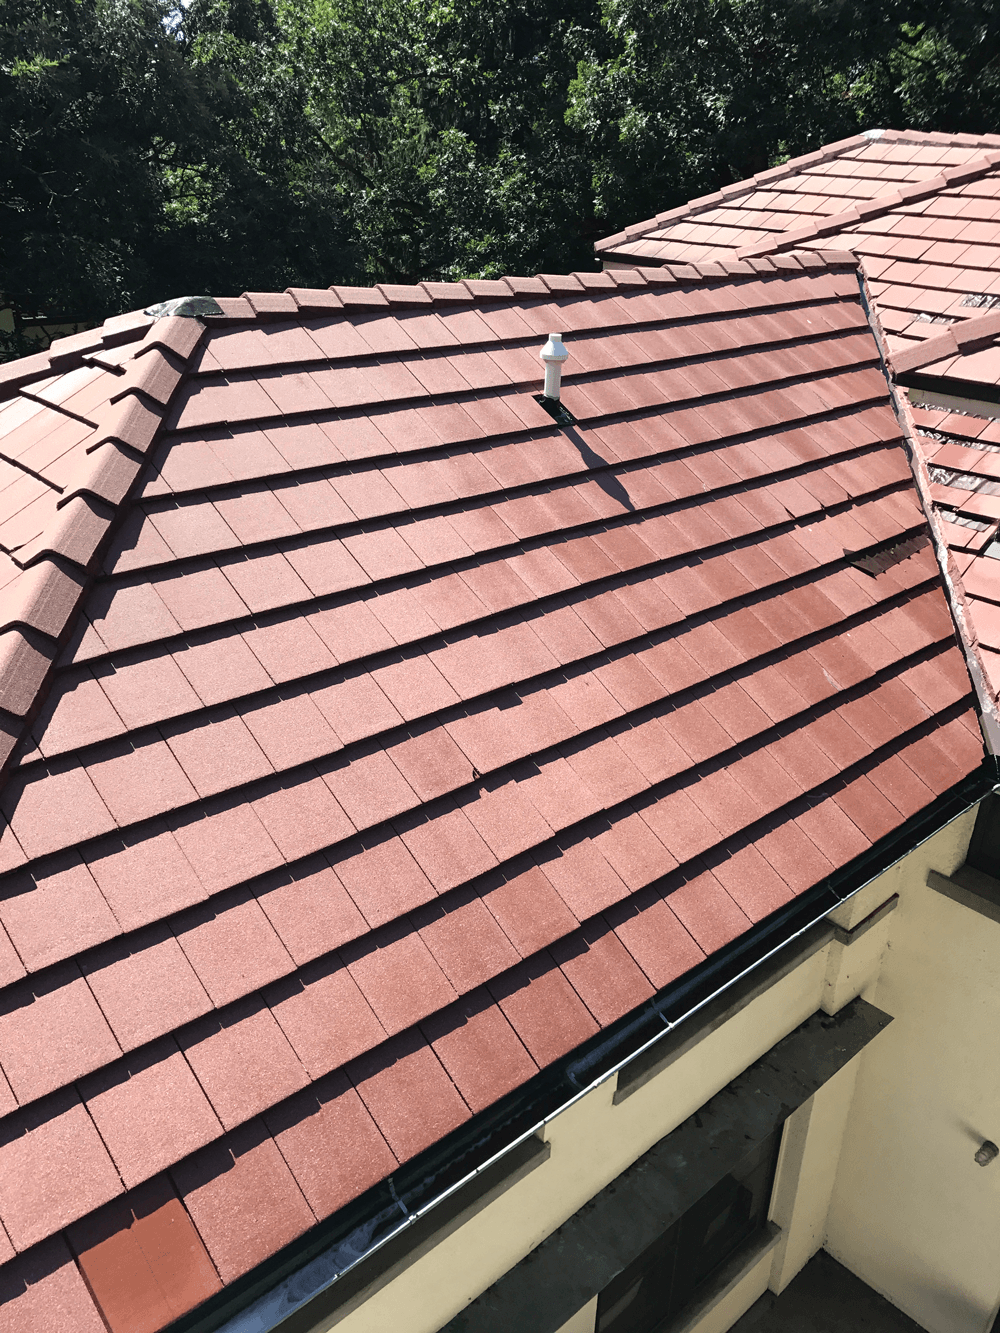 a close up of a red tile roof on a house .